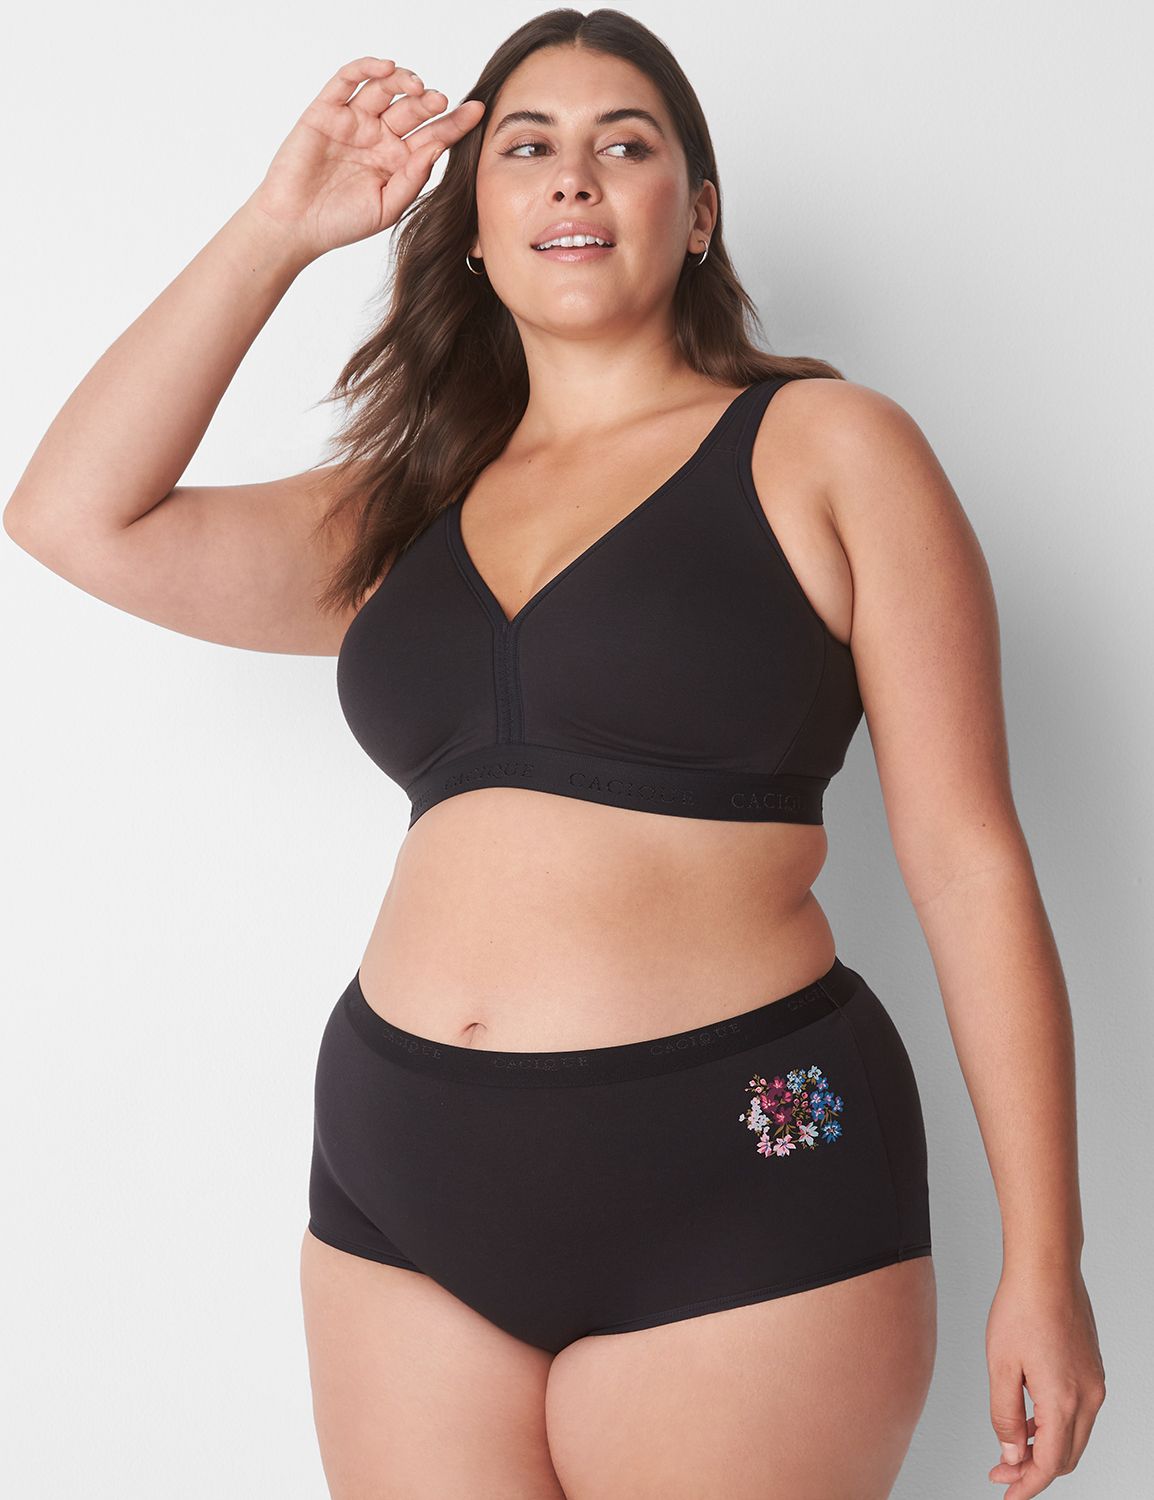 Lane Bryant - Your weekend plans: Pop into your local store for